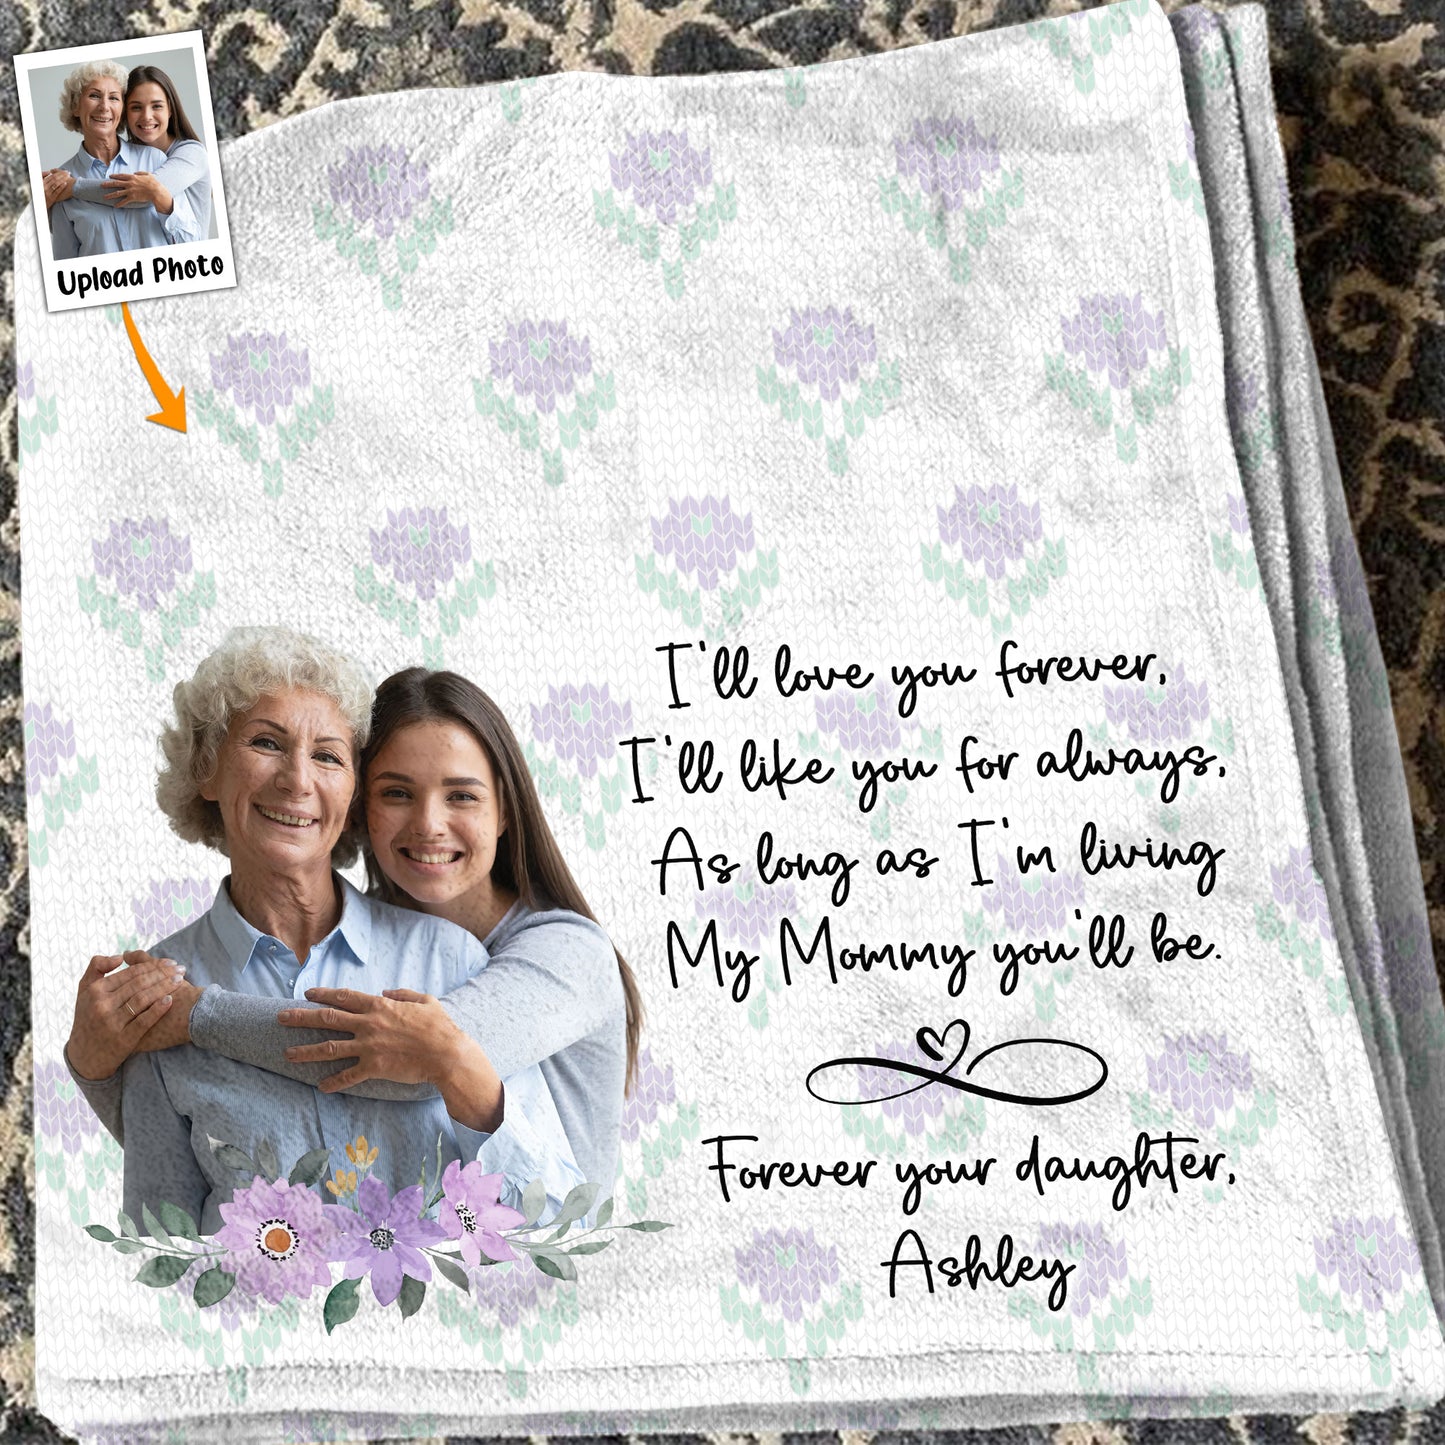 My Mommy You'll Be - Personalized Photo Blanket